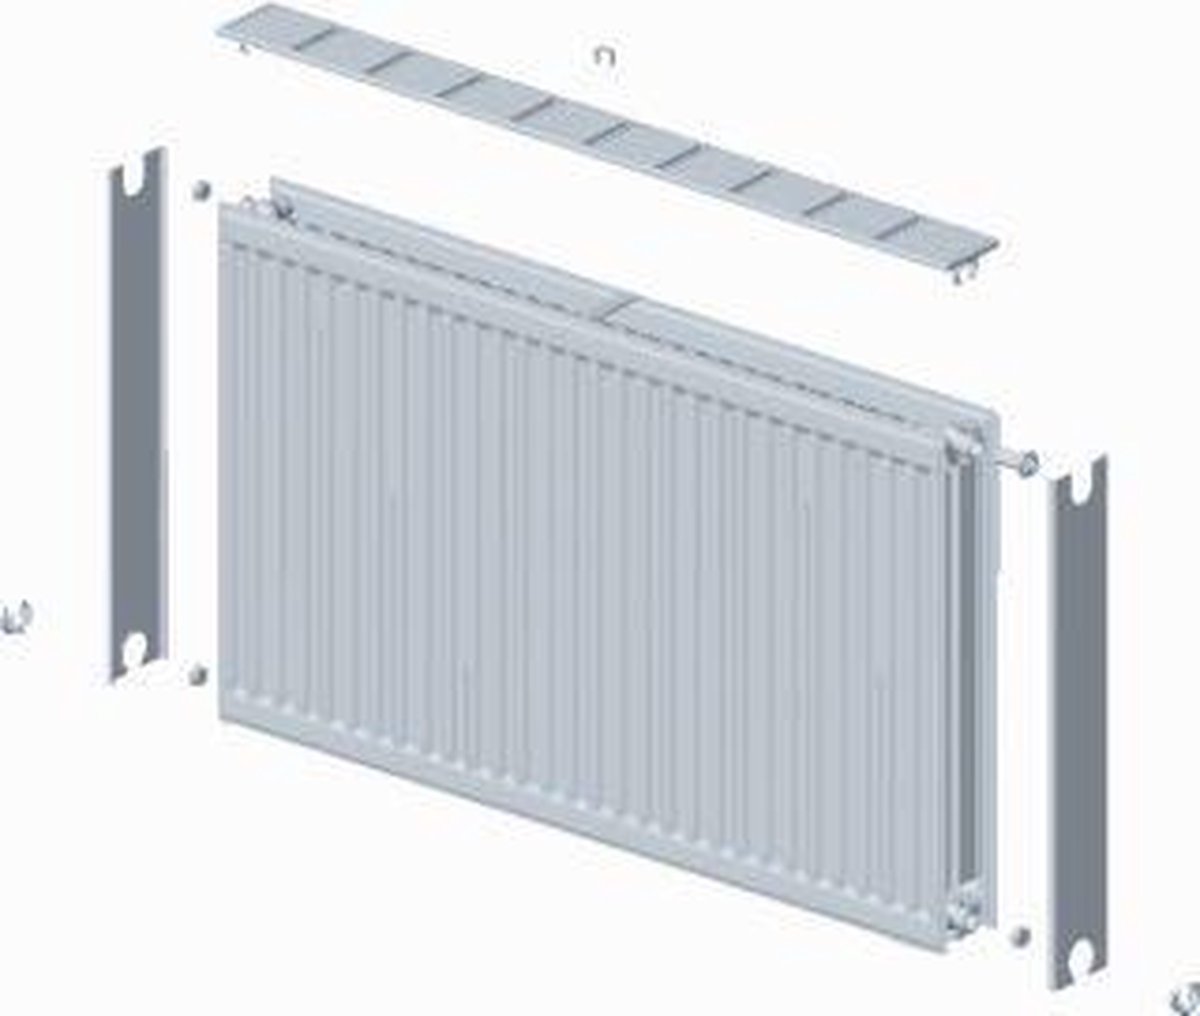 Stelrad paneelradiator Novello, staal, wit, (hxlxd) 500x1800x100mm, 22